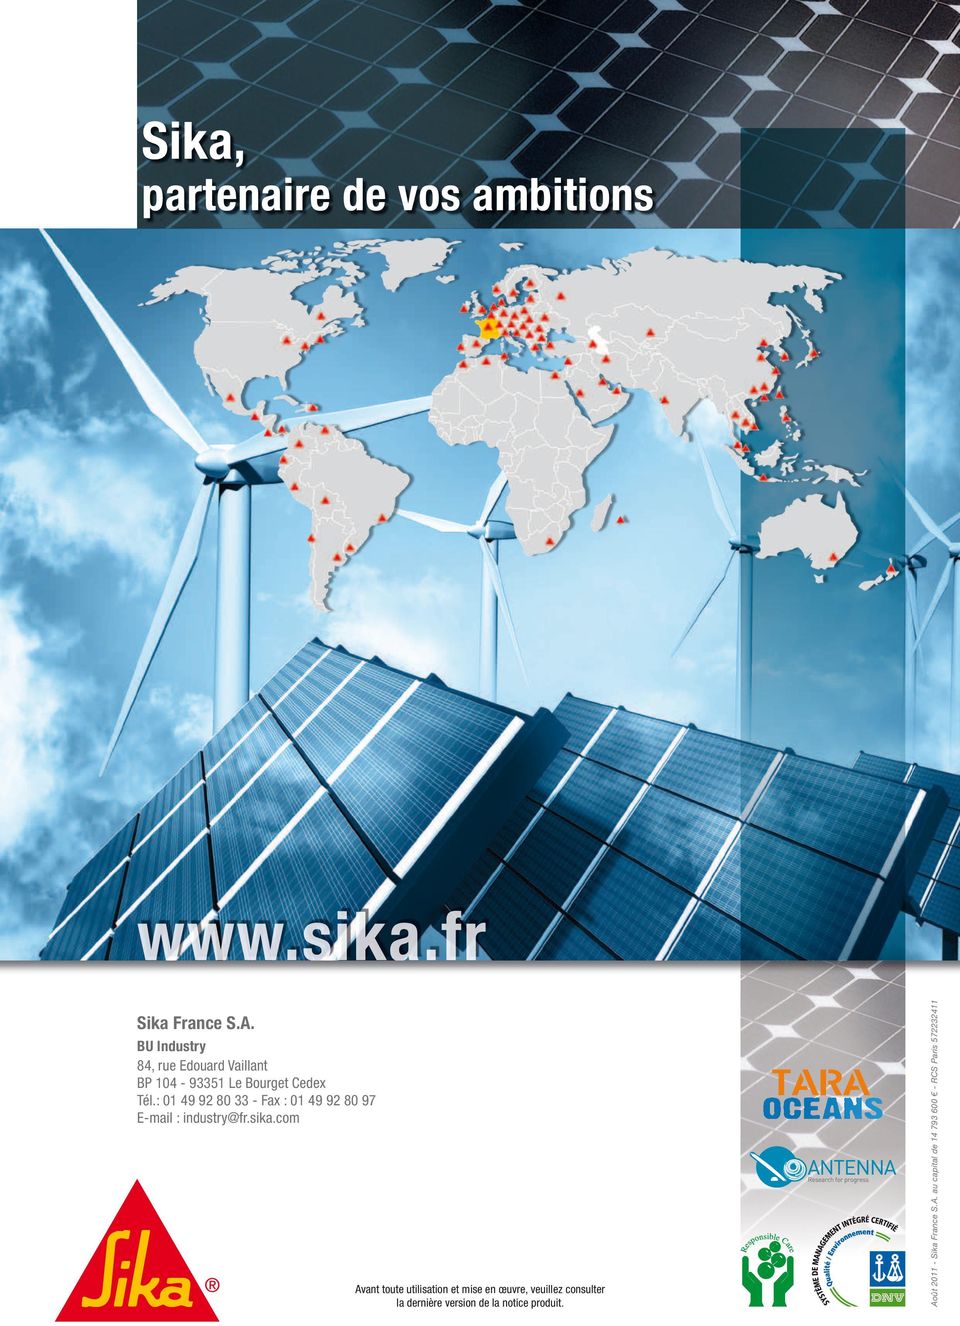 : 01 49 92 80 33 - Fax : 01 49 92 80 97 E-mail : industry@fr.sika.